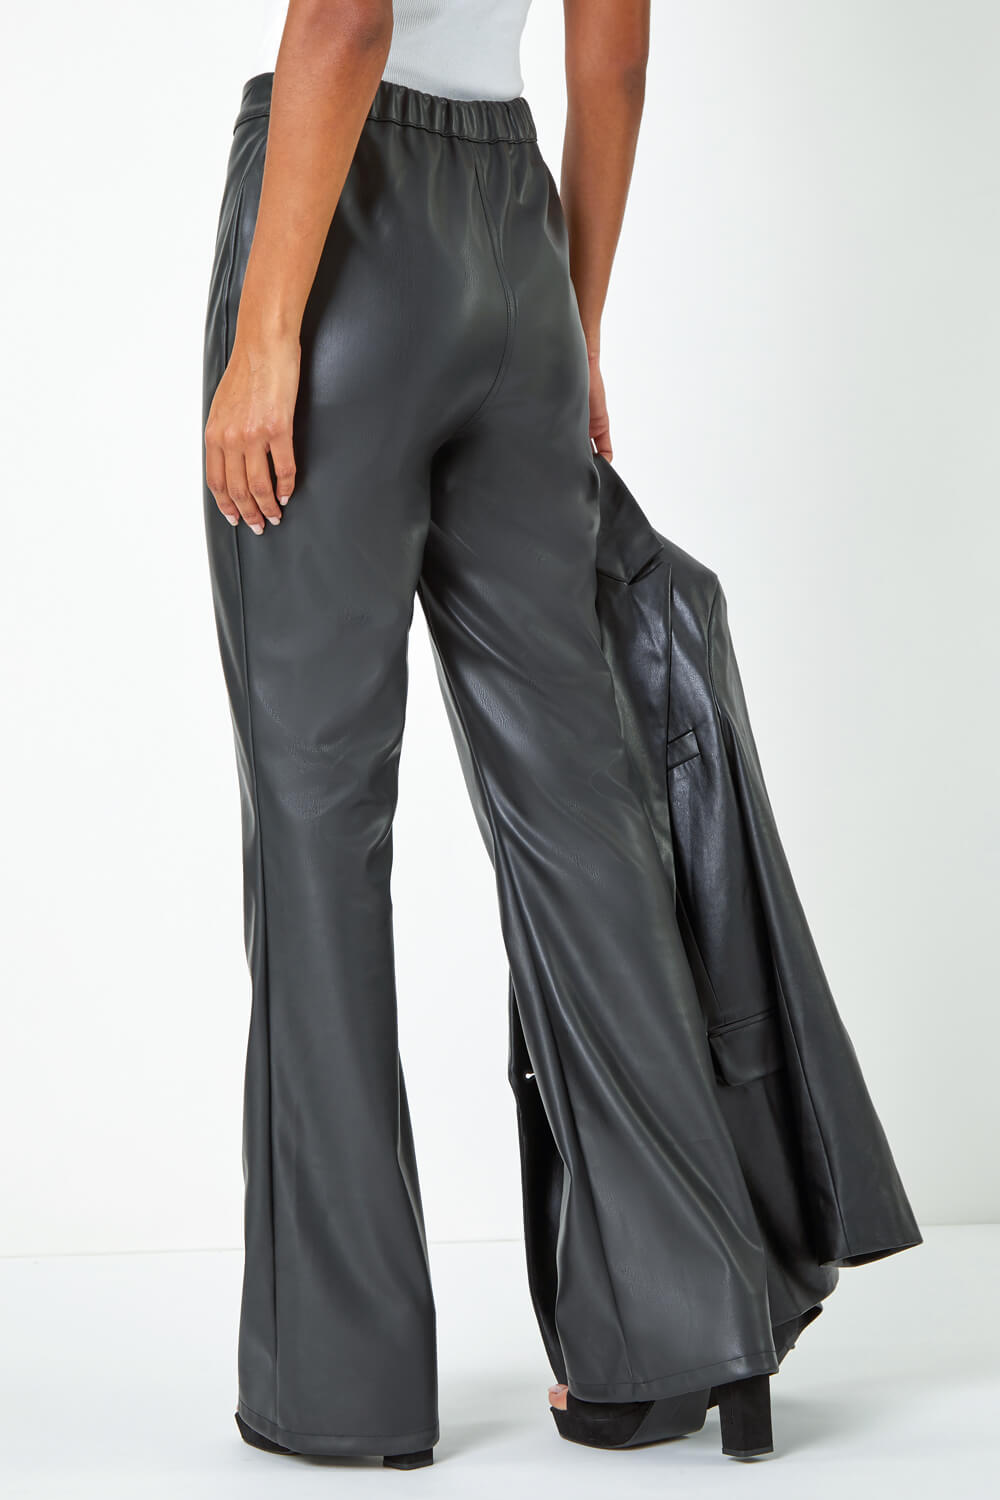 Black Faux Leather Bootcut Stretch Trousers, Image 3 of 6